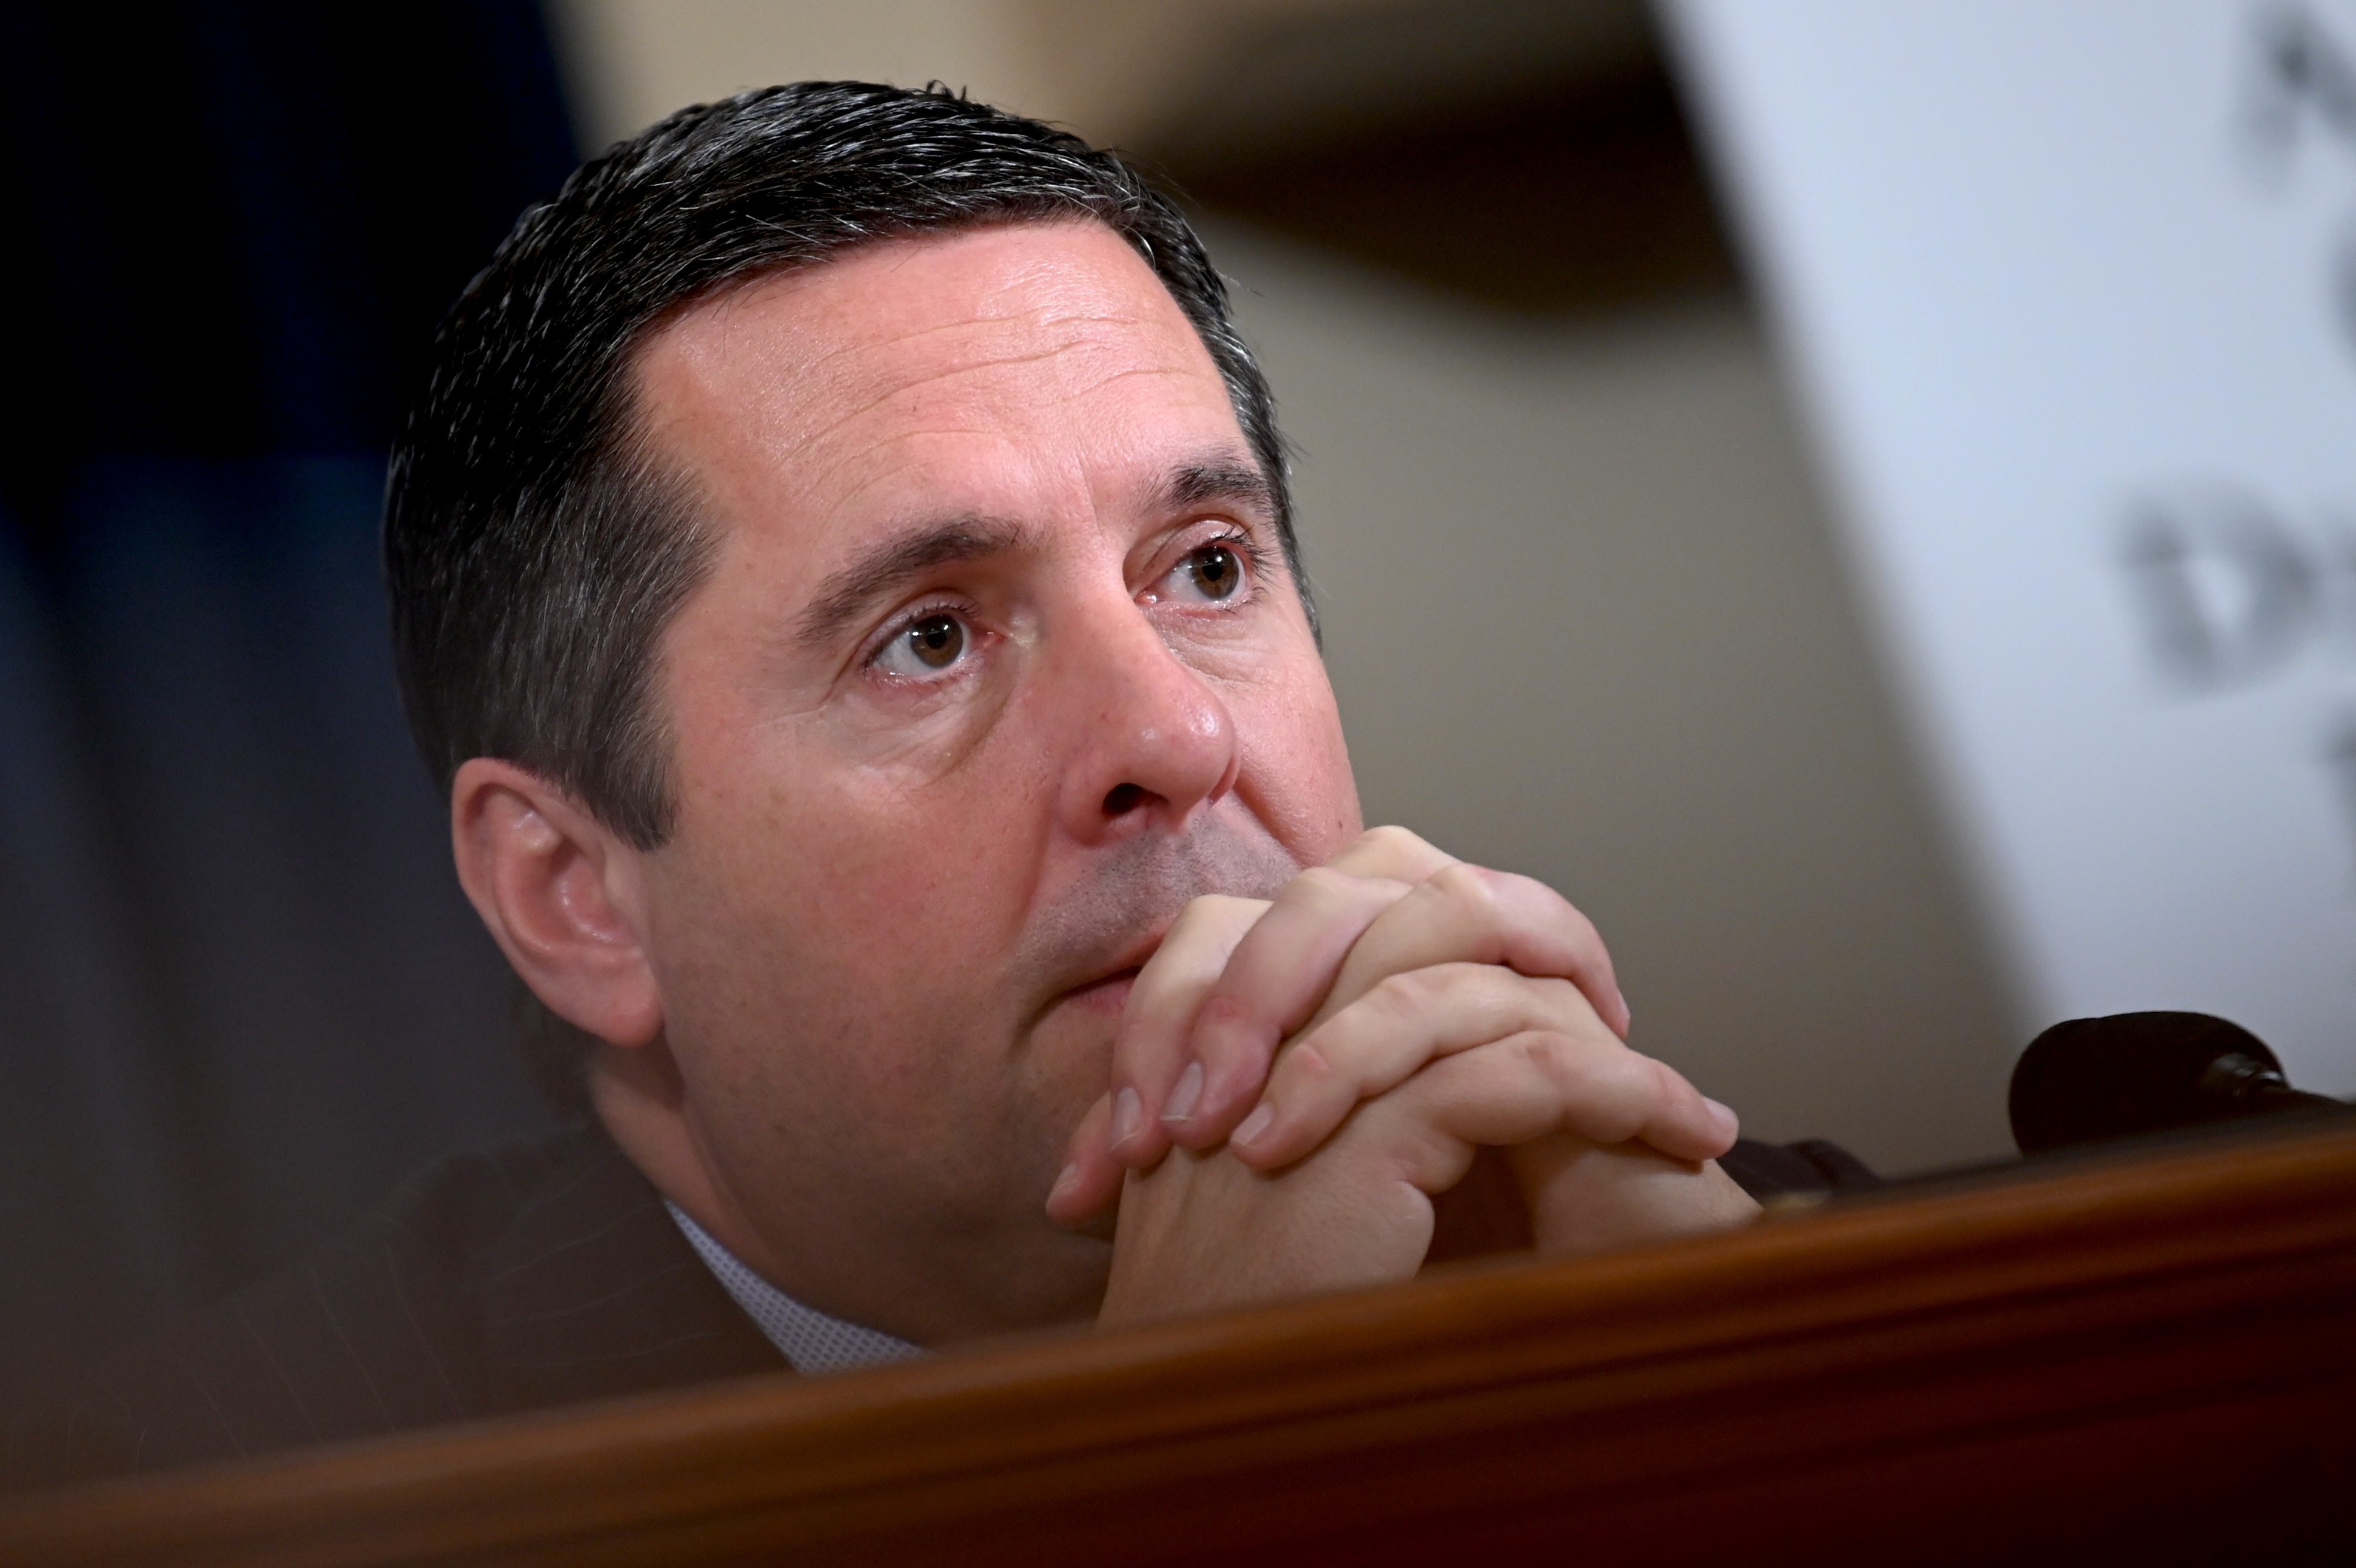 Devin Nunes predicts GOP will be put under pressure to accuse Biden if they take the house in 2022